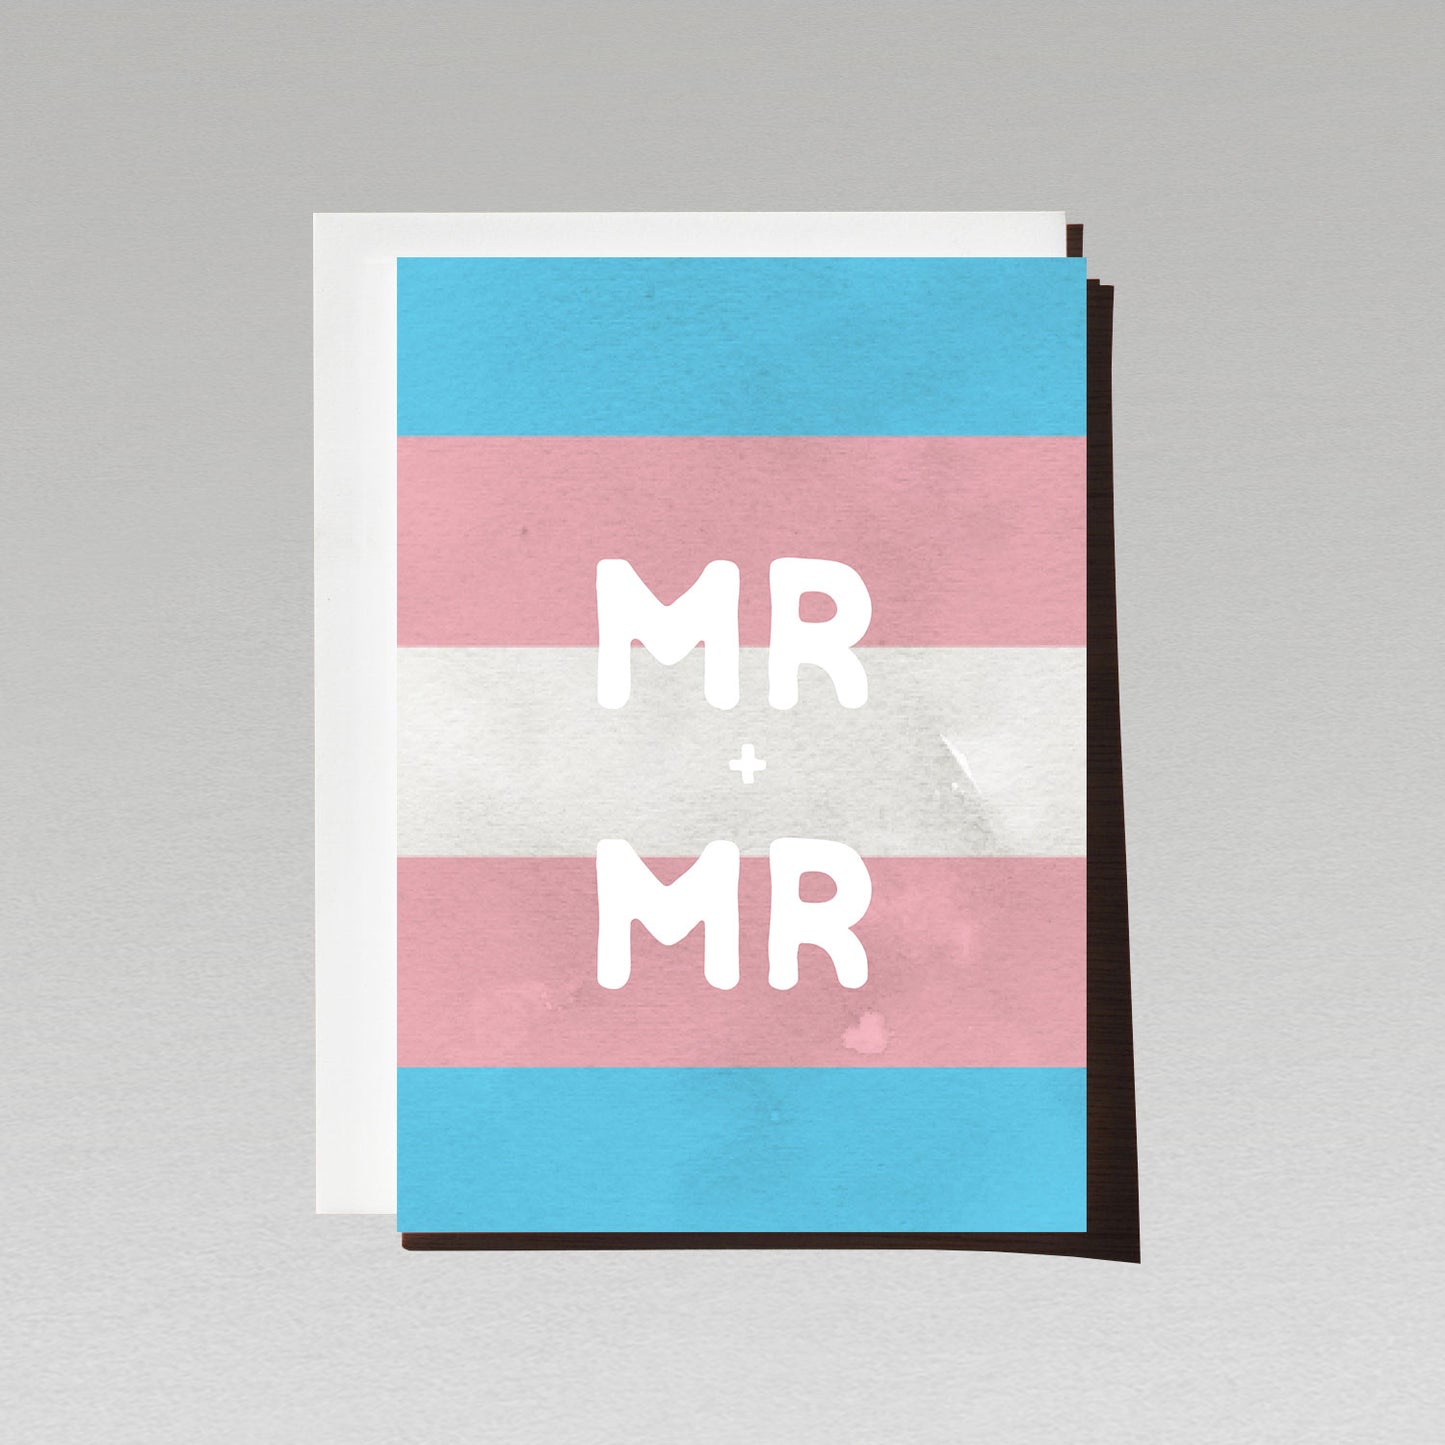 Greeting card with large white text Mr + Mr on LGBTQI transgender flag background